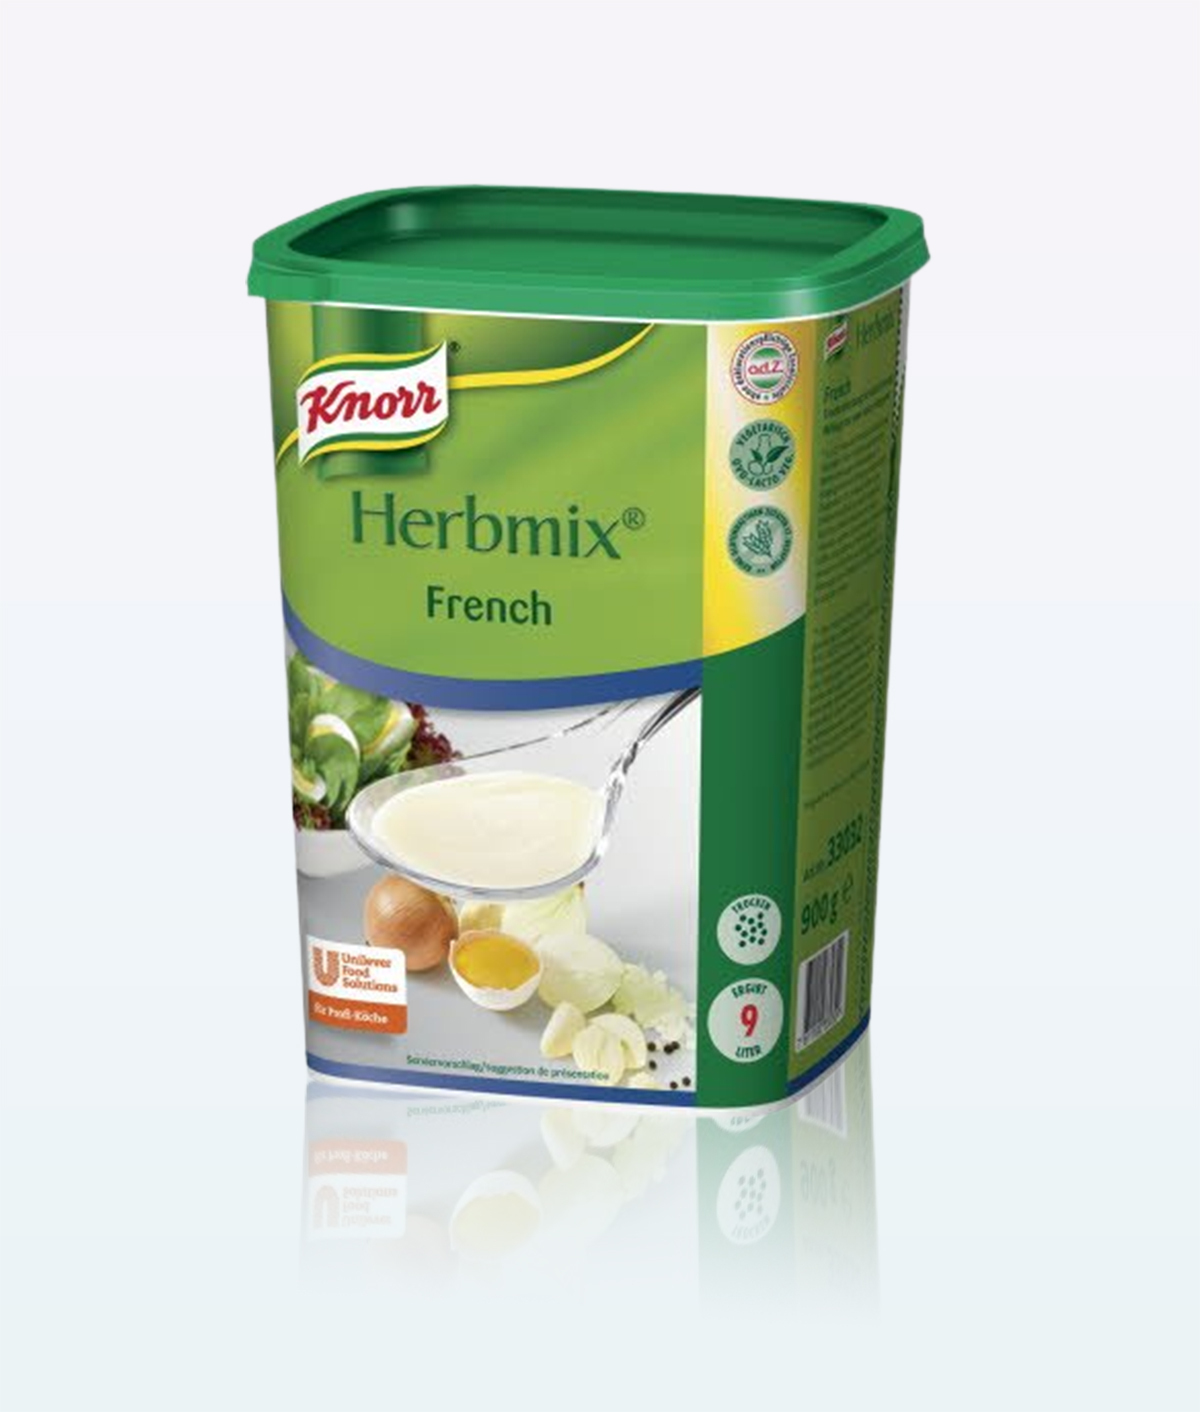 Knorr Herbmix French